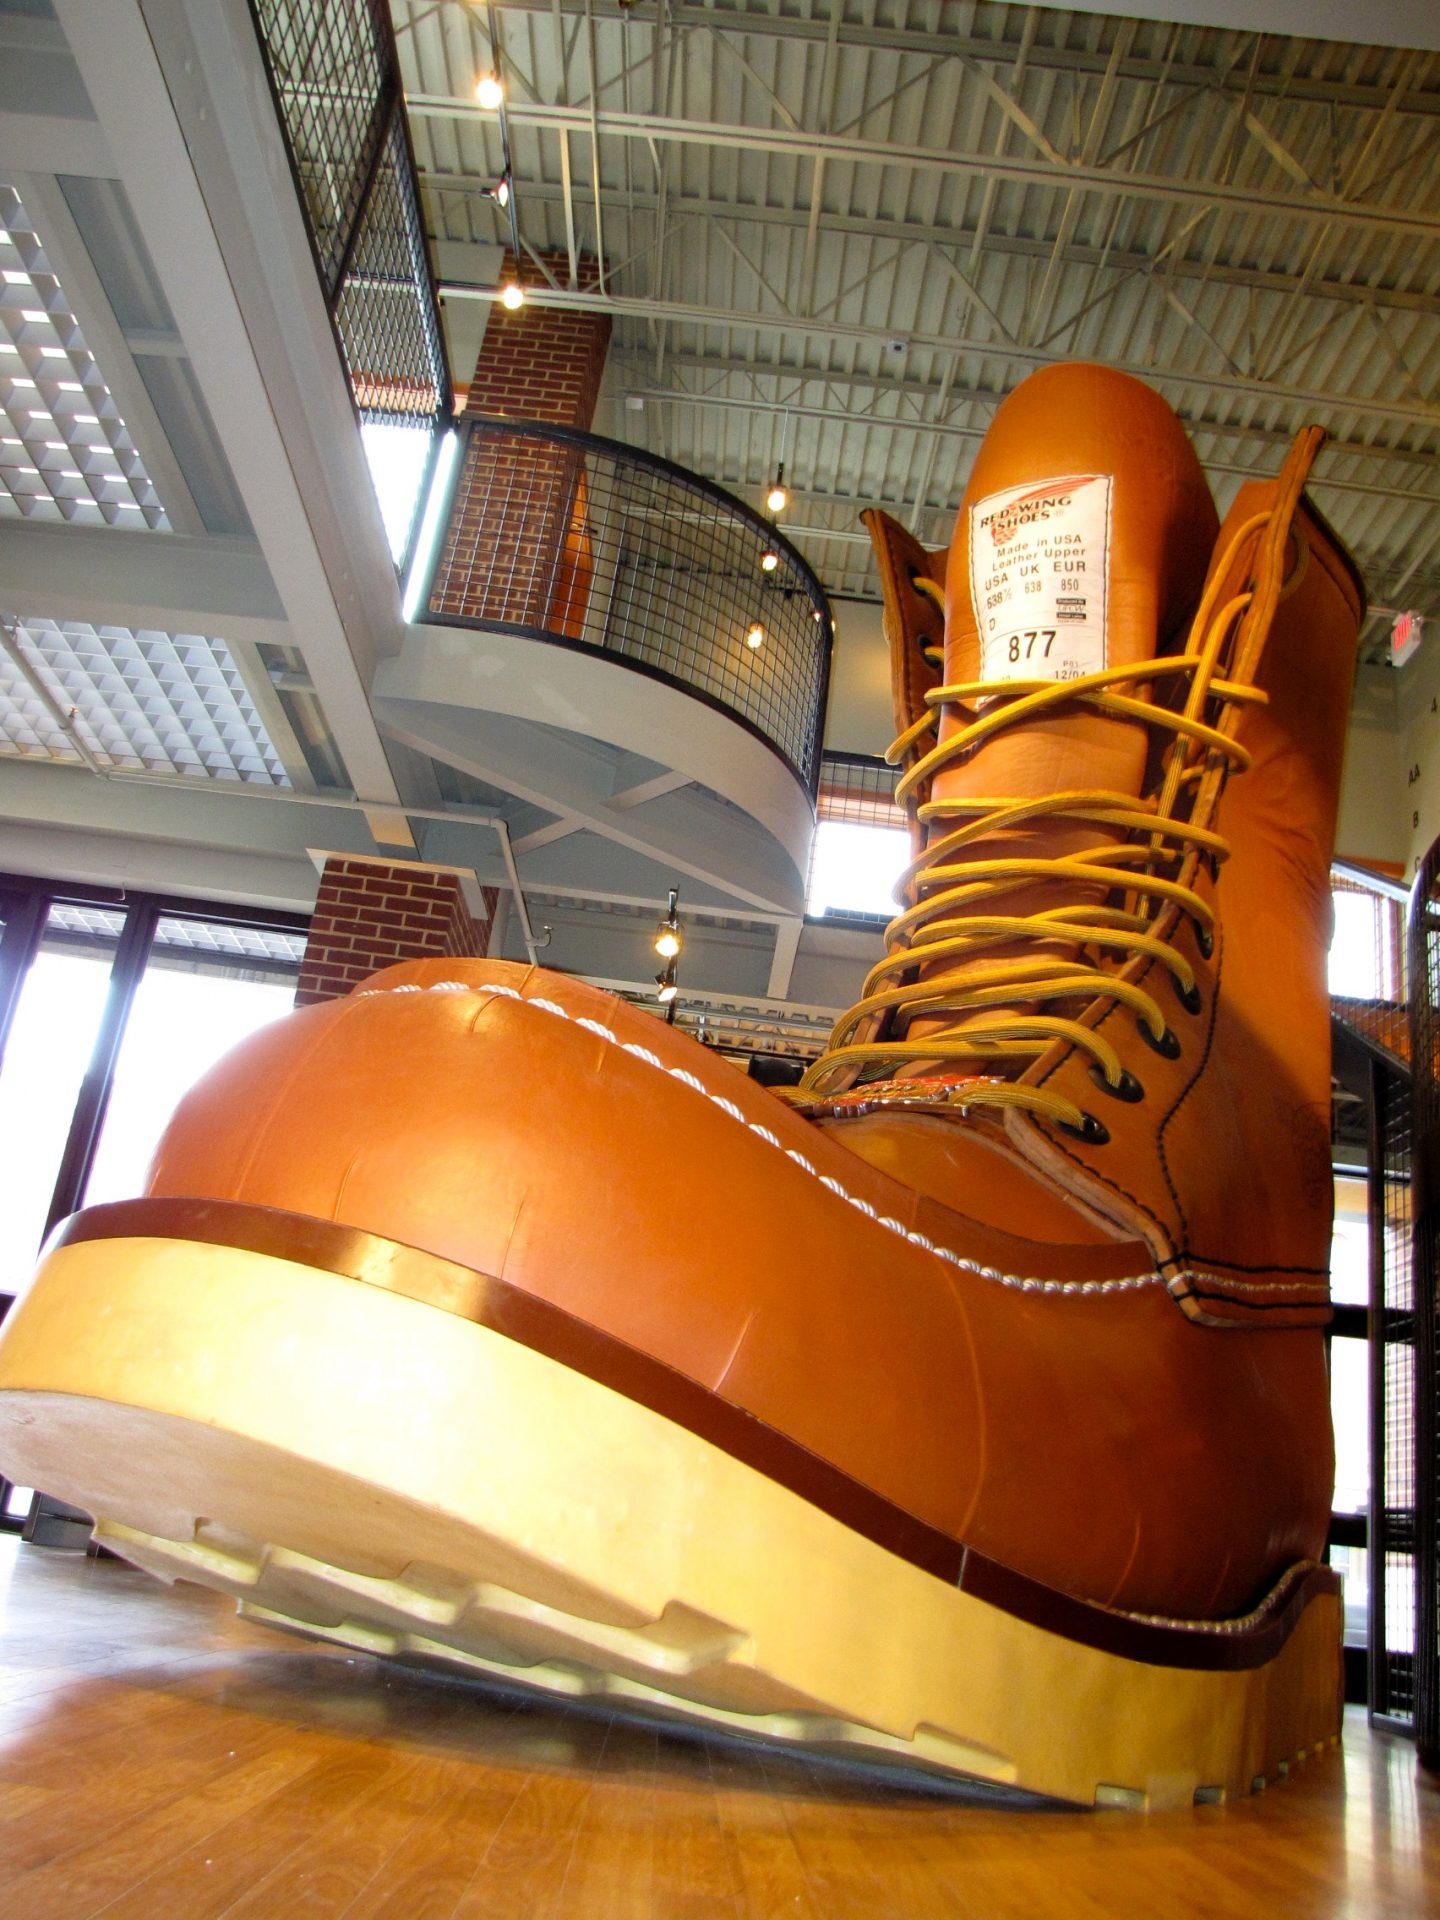 Interesting places to see in Minnesota include the original Red Wing Shoe Store and Museum